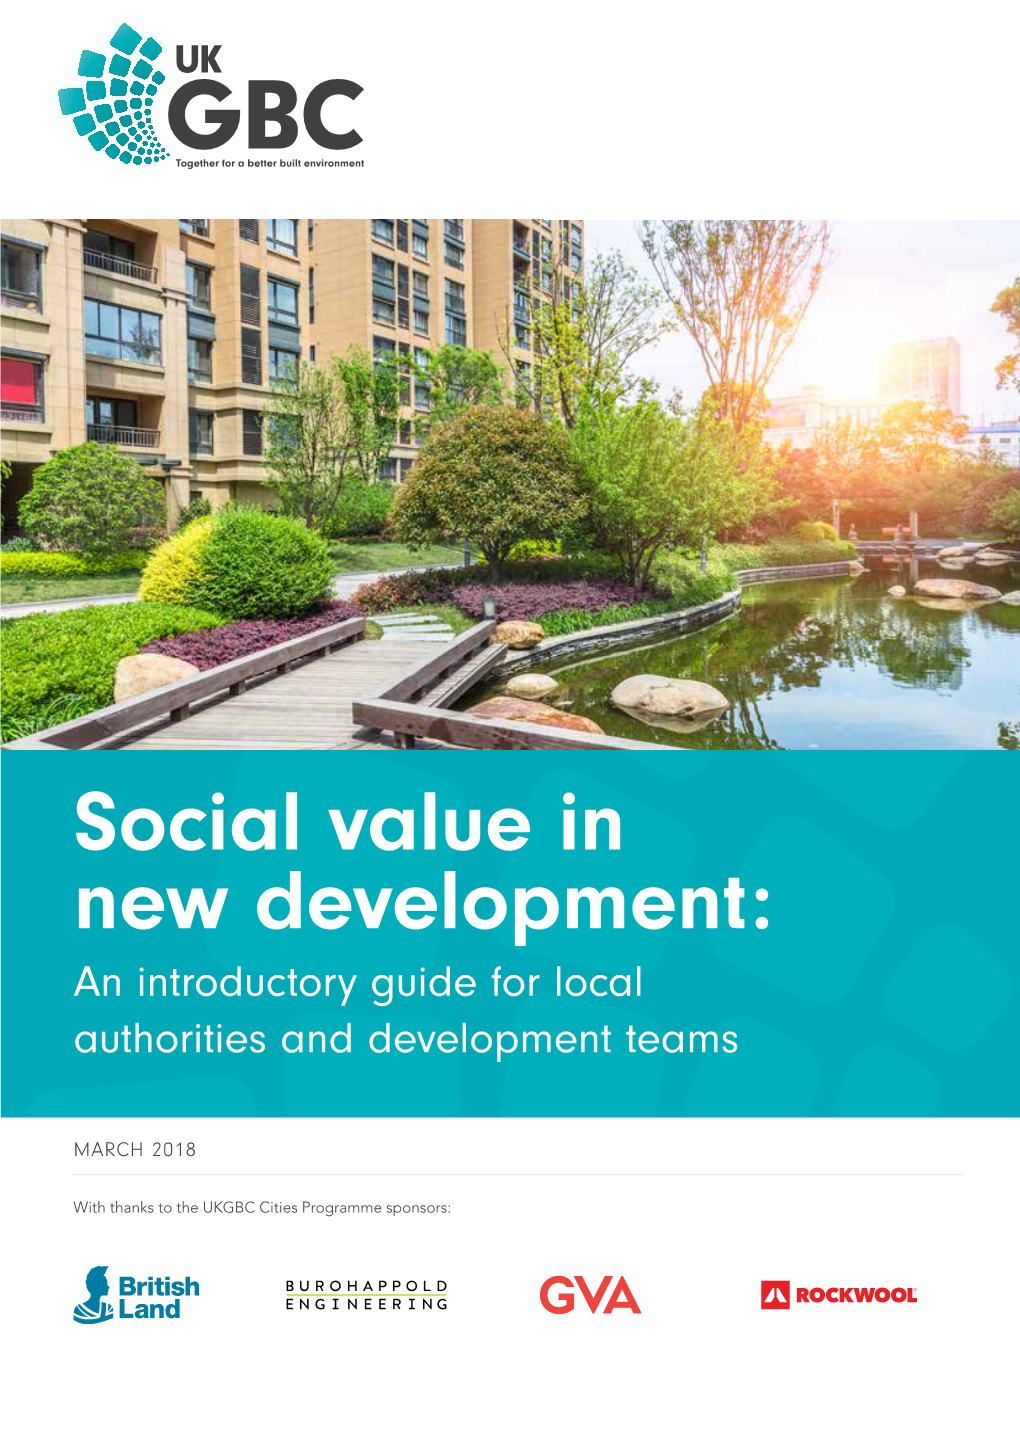 Social Value in New Development: an Introductory Guide for Local Authorities and Development Teams